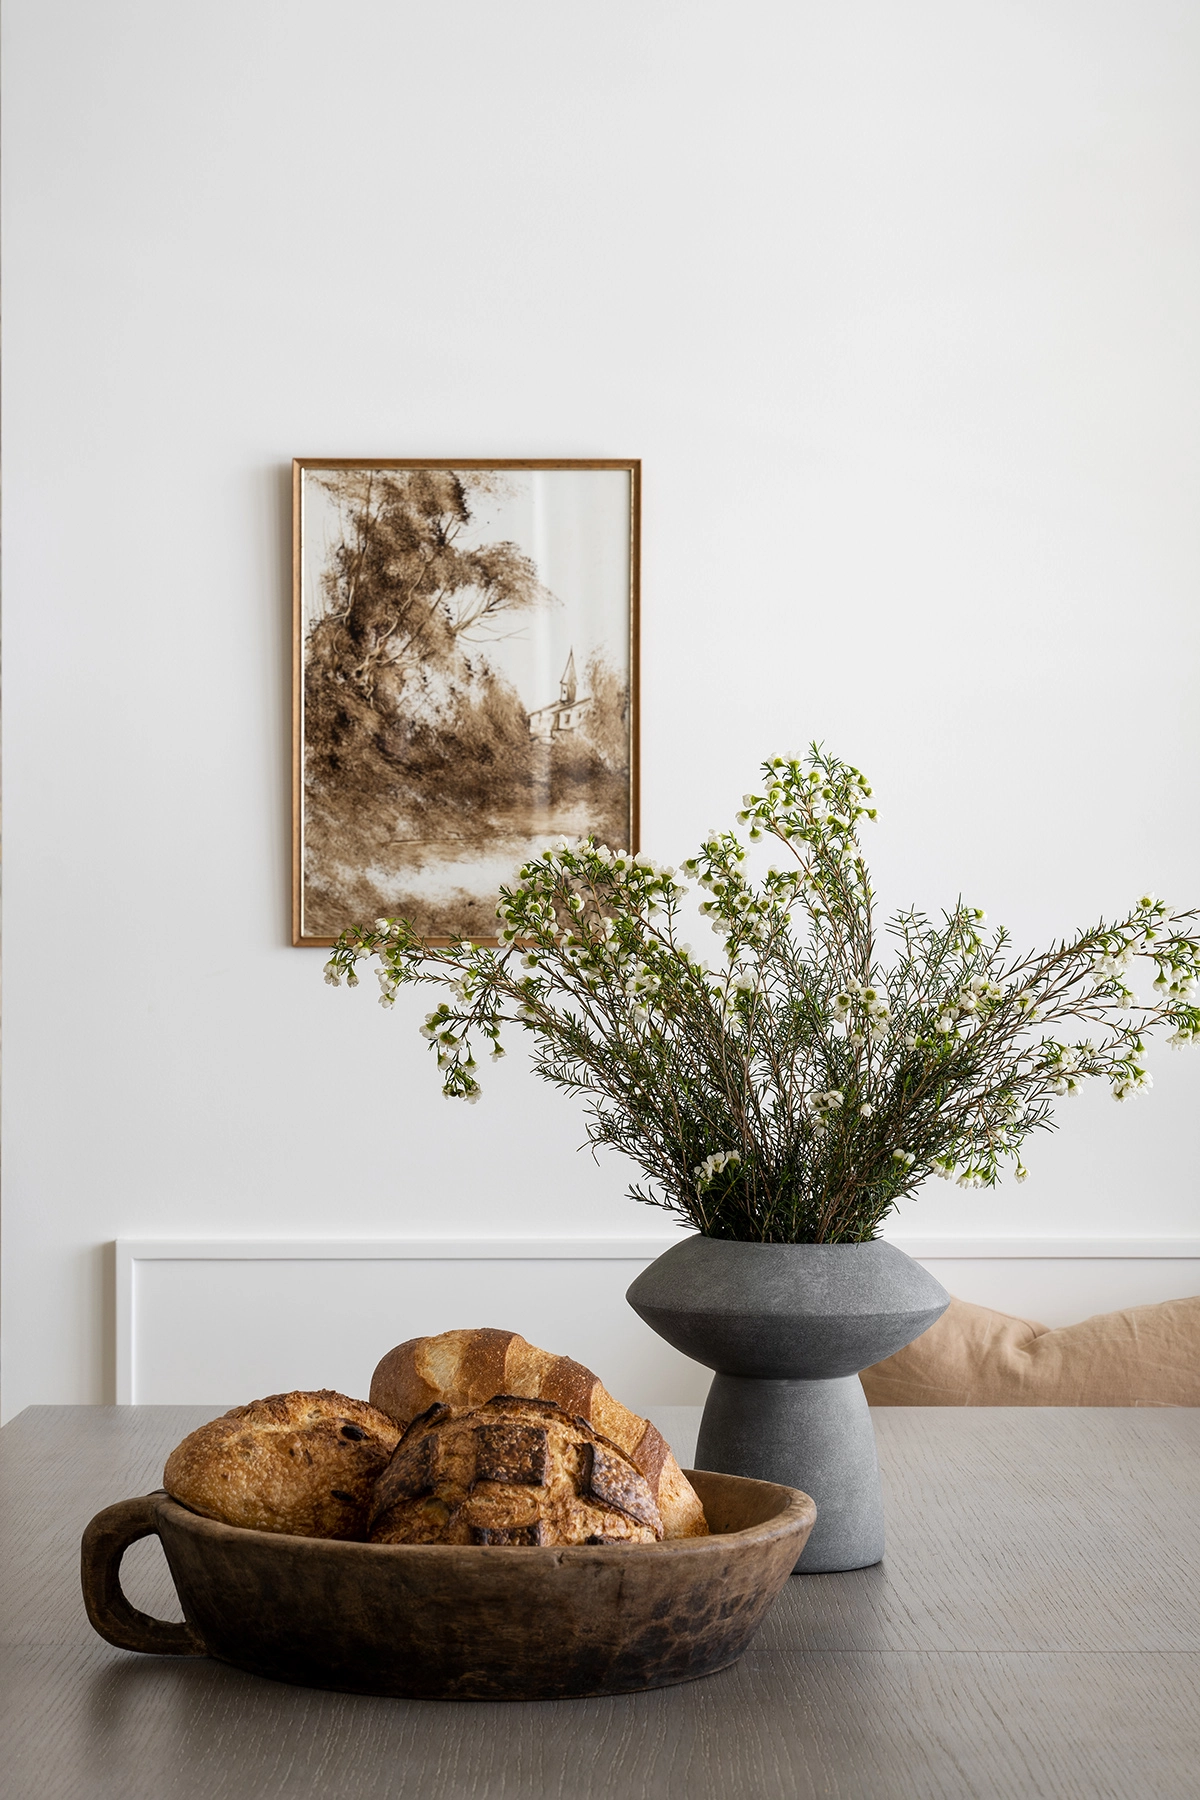 dining nook with bread basket and vase with greenery